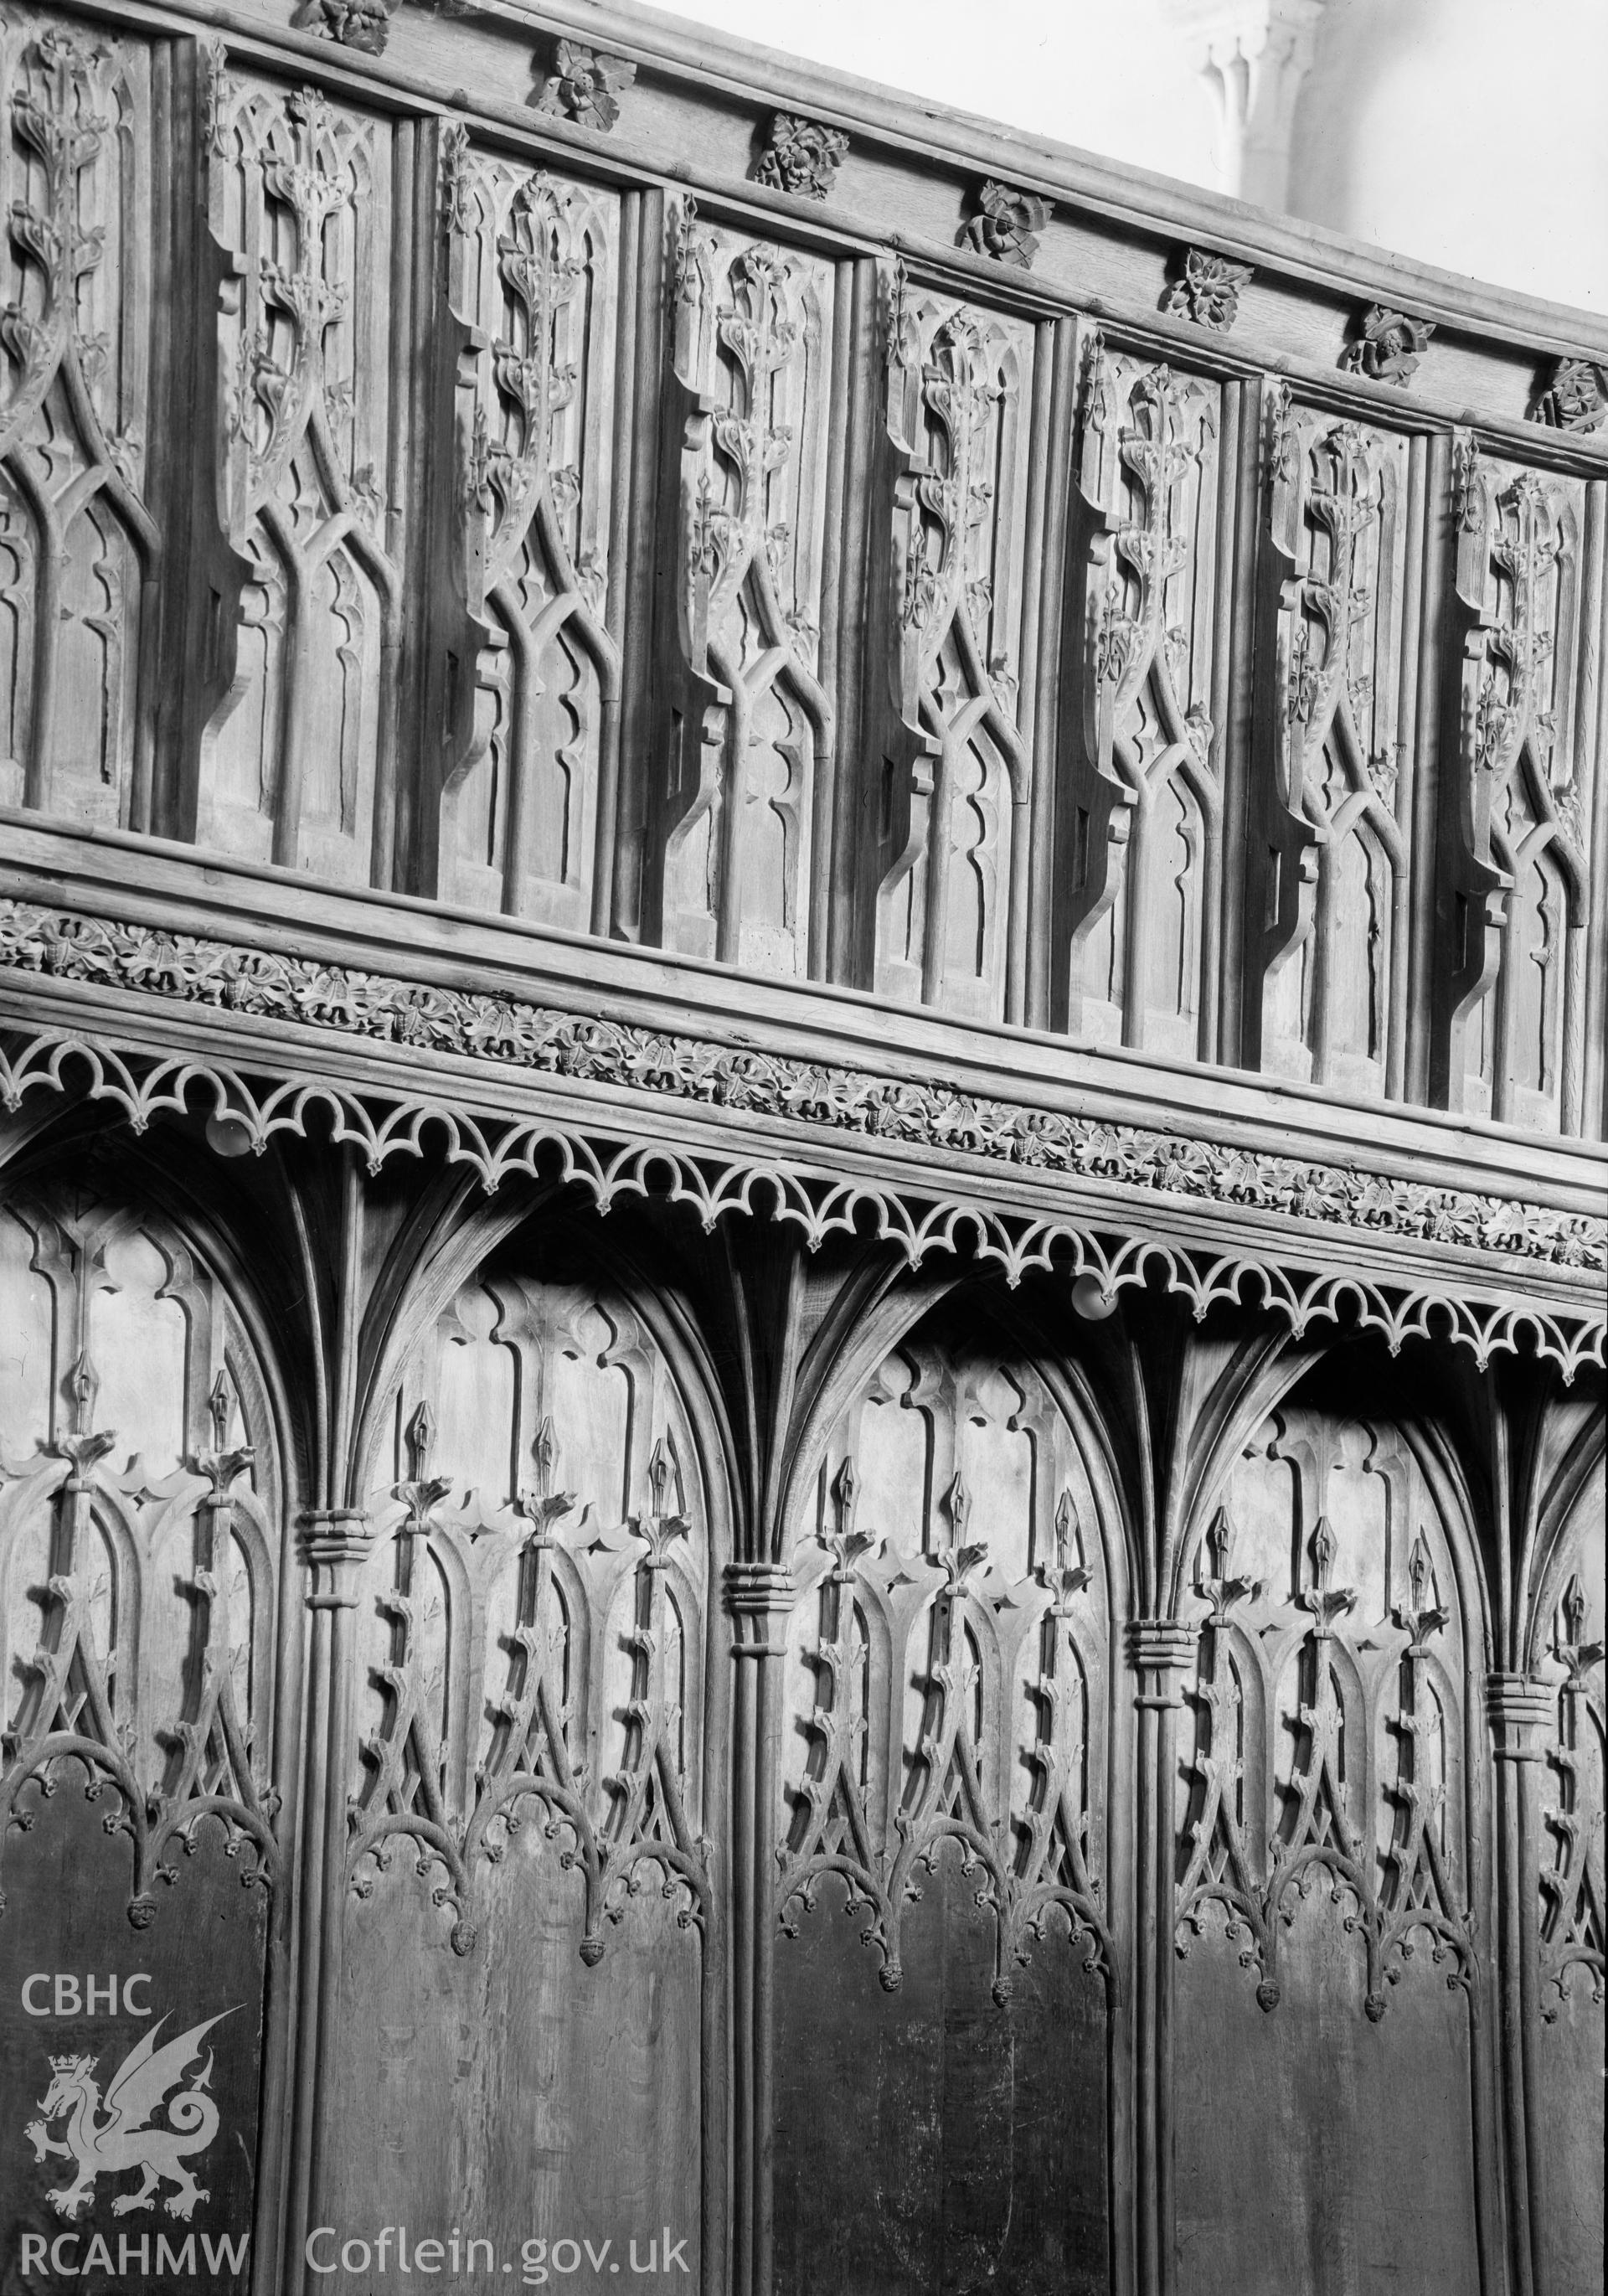 Digital copy of a black and white acetate negative showing interior detail at St. David's Cathedral, taken by E.W. Lovegrove, July 1936.